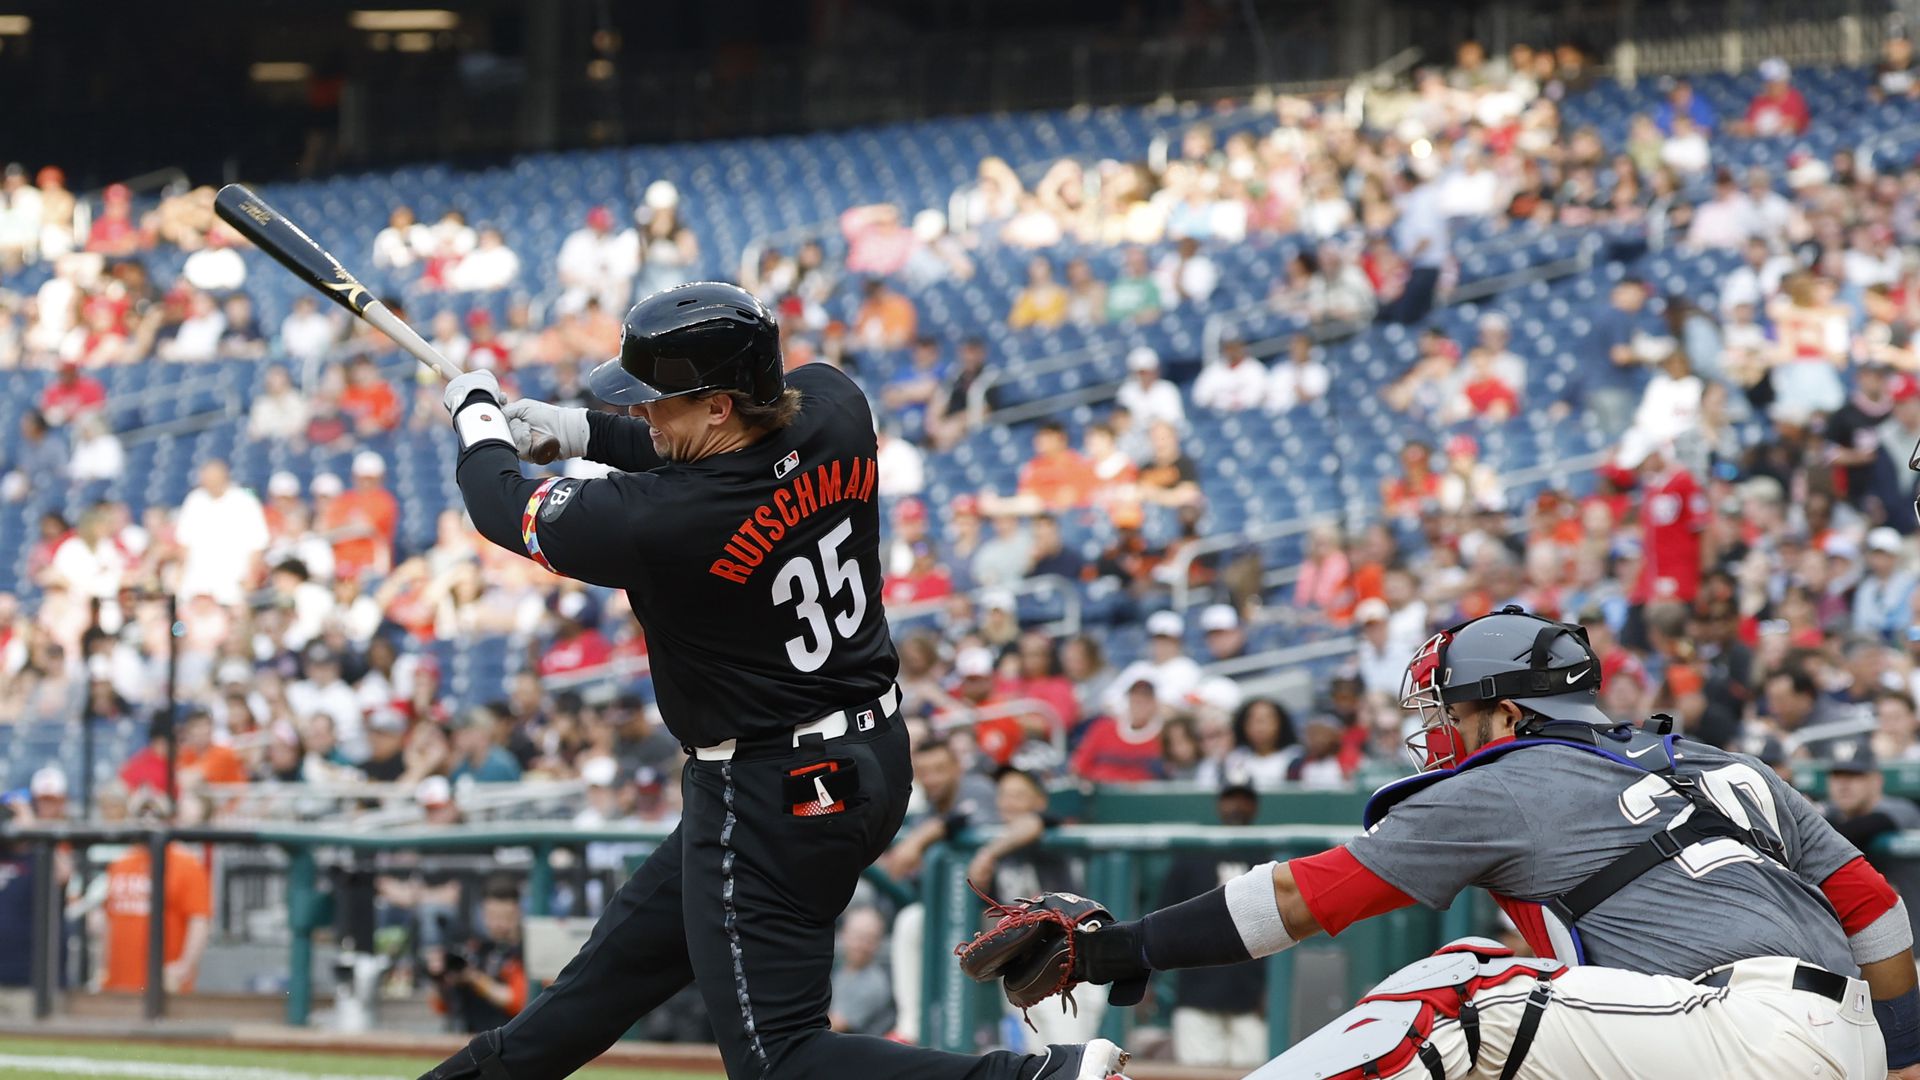 orioles inexplicably forget to bring bats to stadium in 3-0 loss to nationals